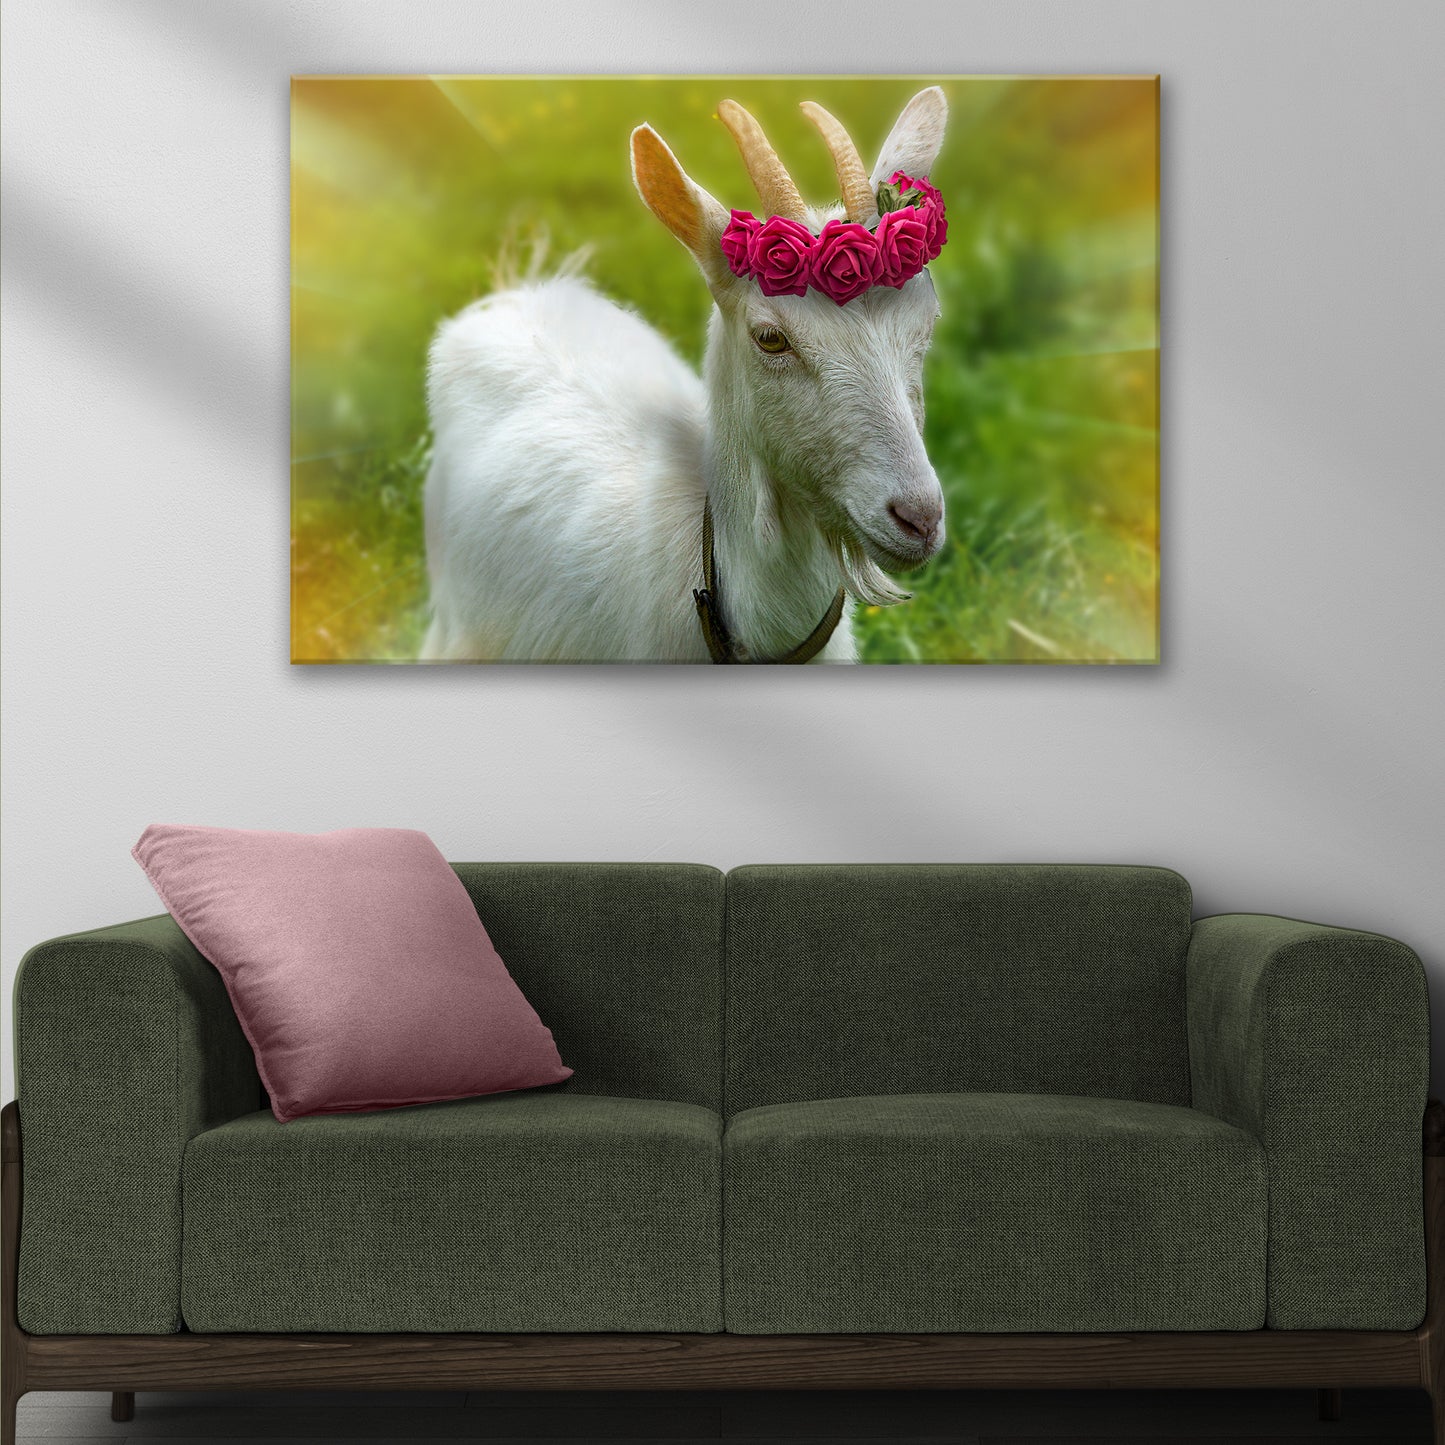 Red Flower Crown Goat Canvas Wall Art Style 2 - Image by Tailored Canvases